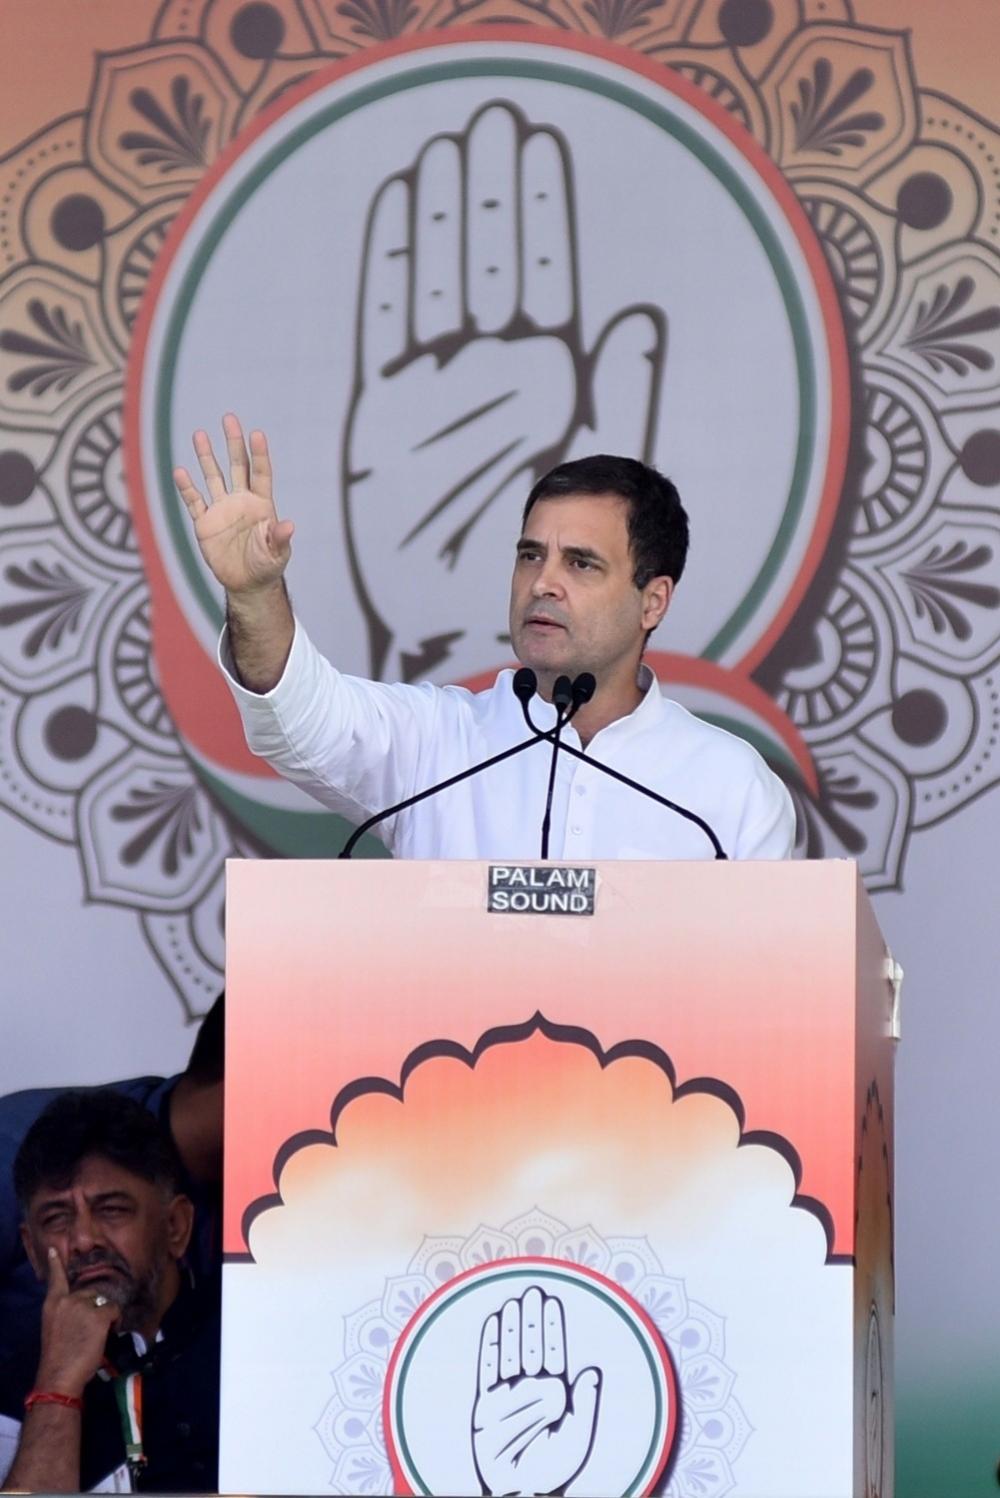 The Weekend Leader - Not afraid of attack from Hindutvawadis, says Rahul